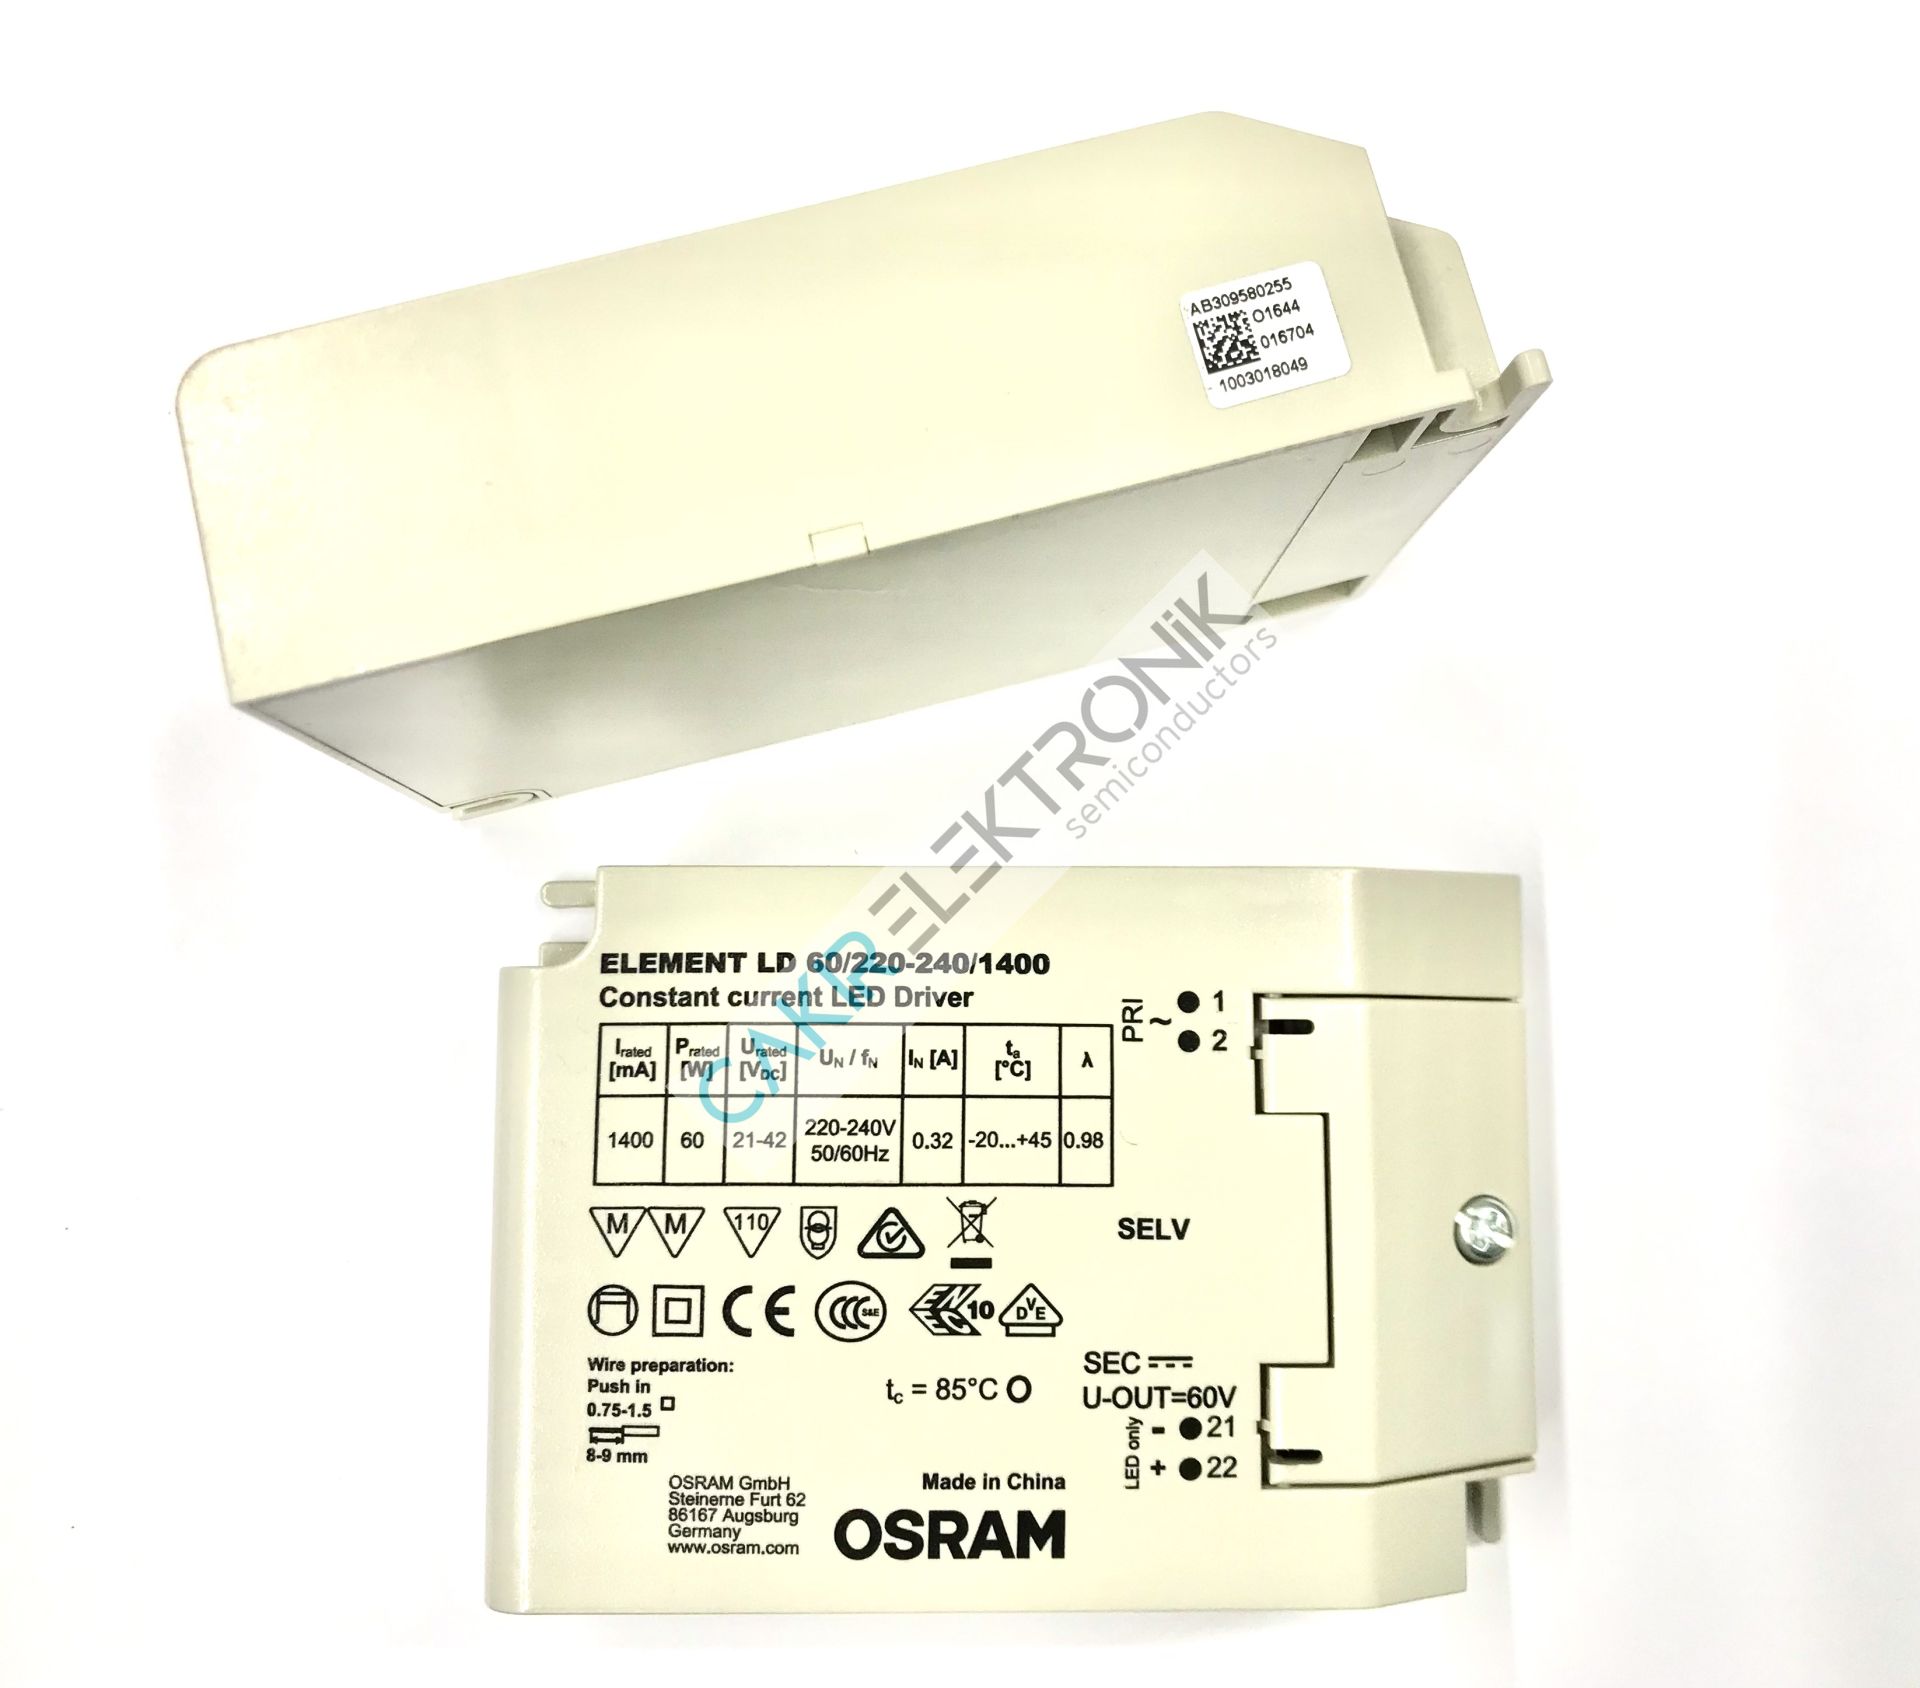 OSRAM ELEMENT LD 60/220-240/1400 ,  LD60/220-240/1400 , 60W 1400MA 21-42V OUT